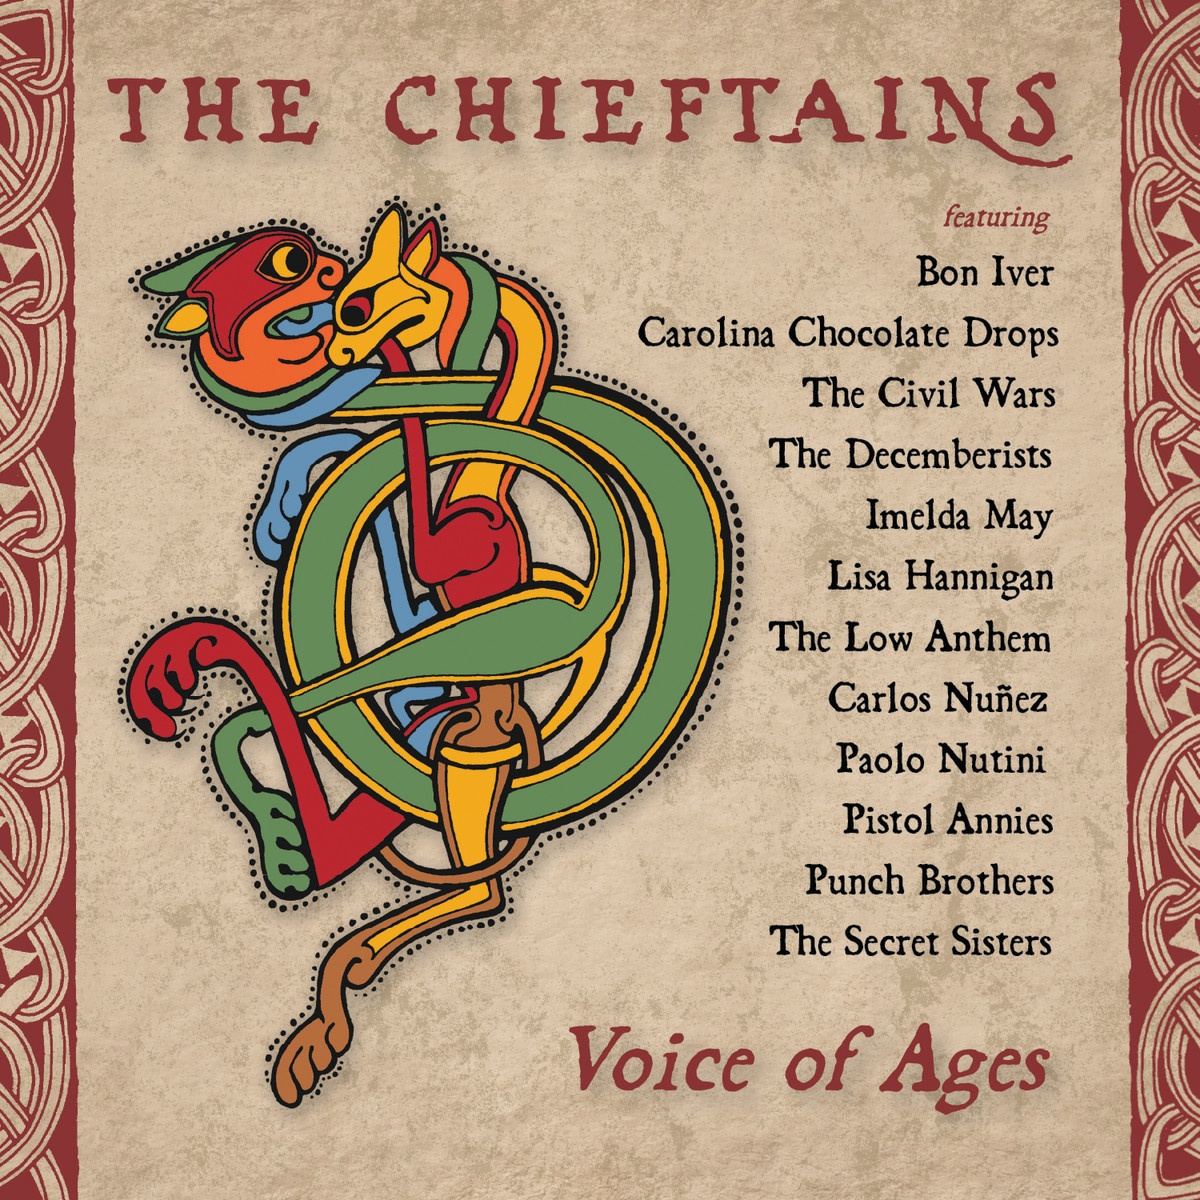 The Chieftains Reunion